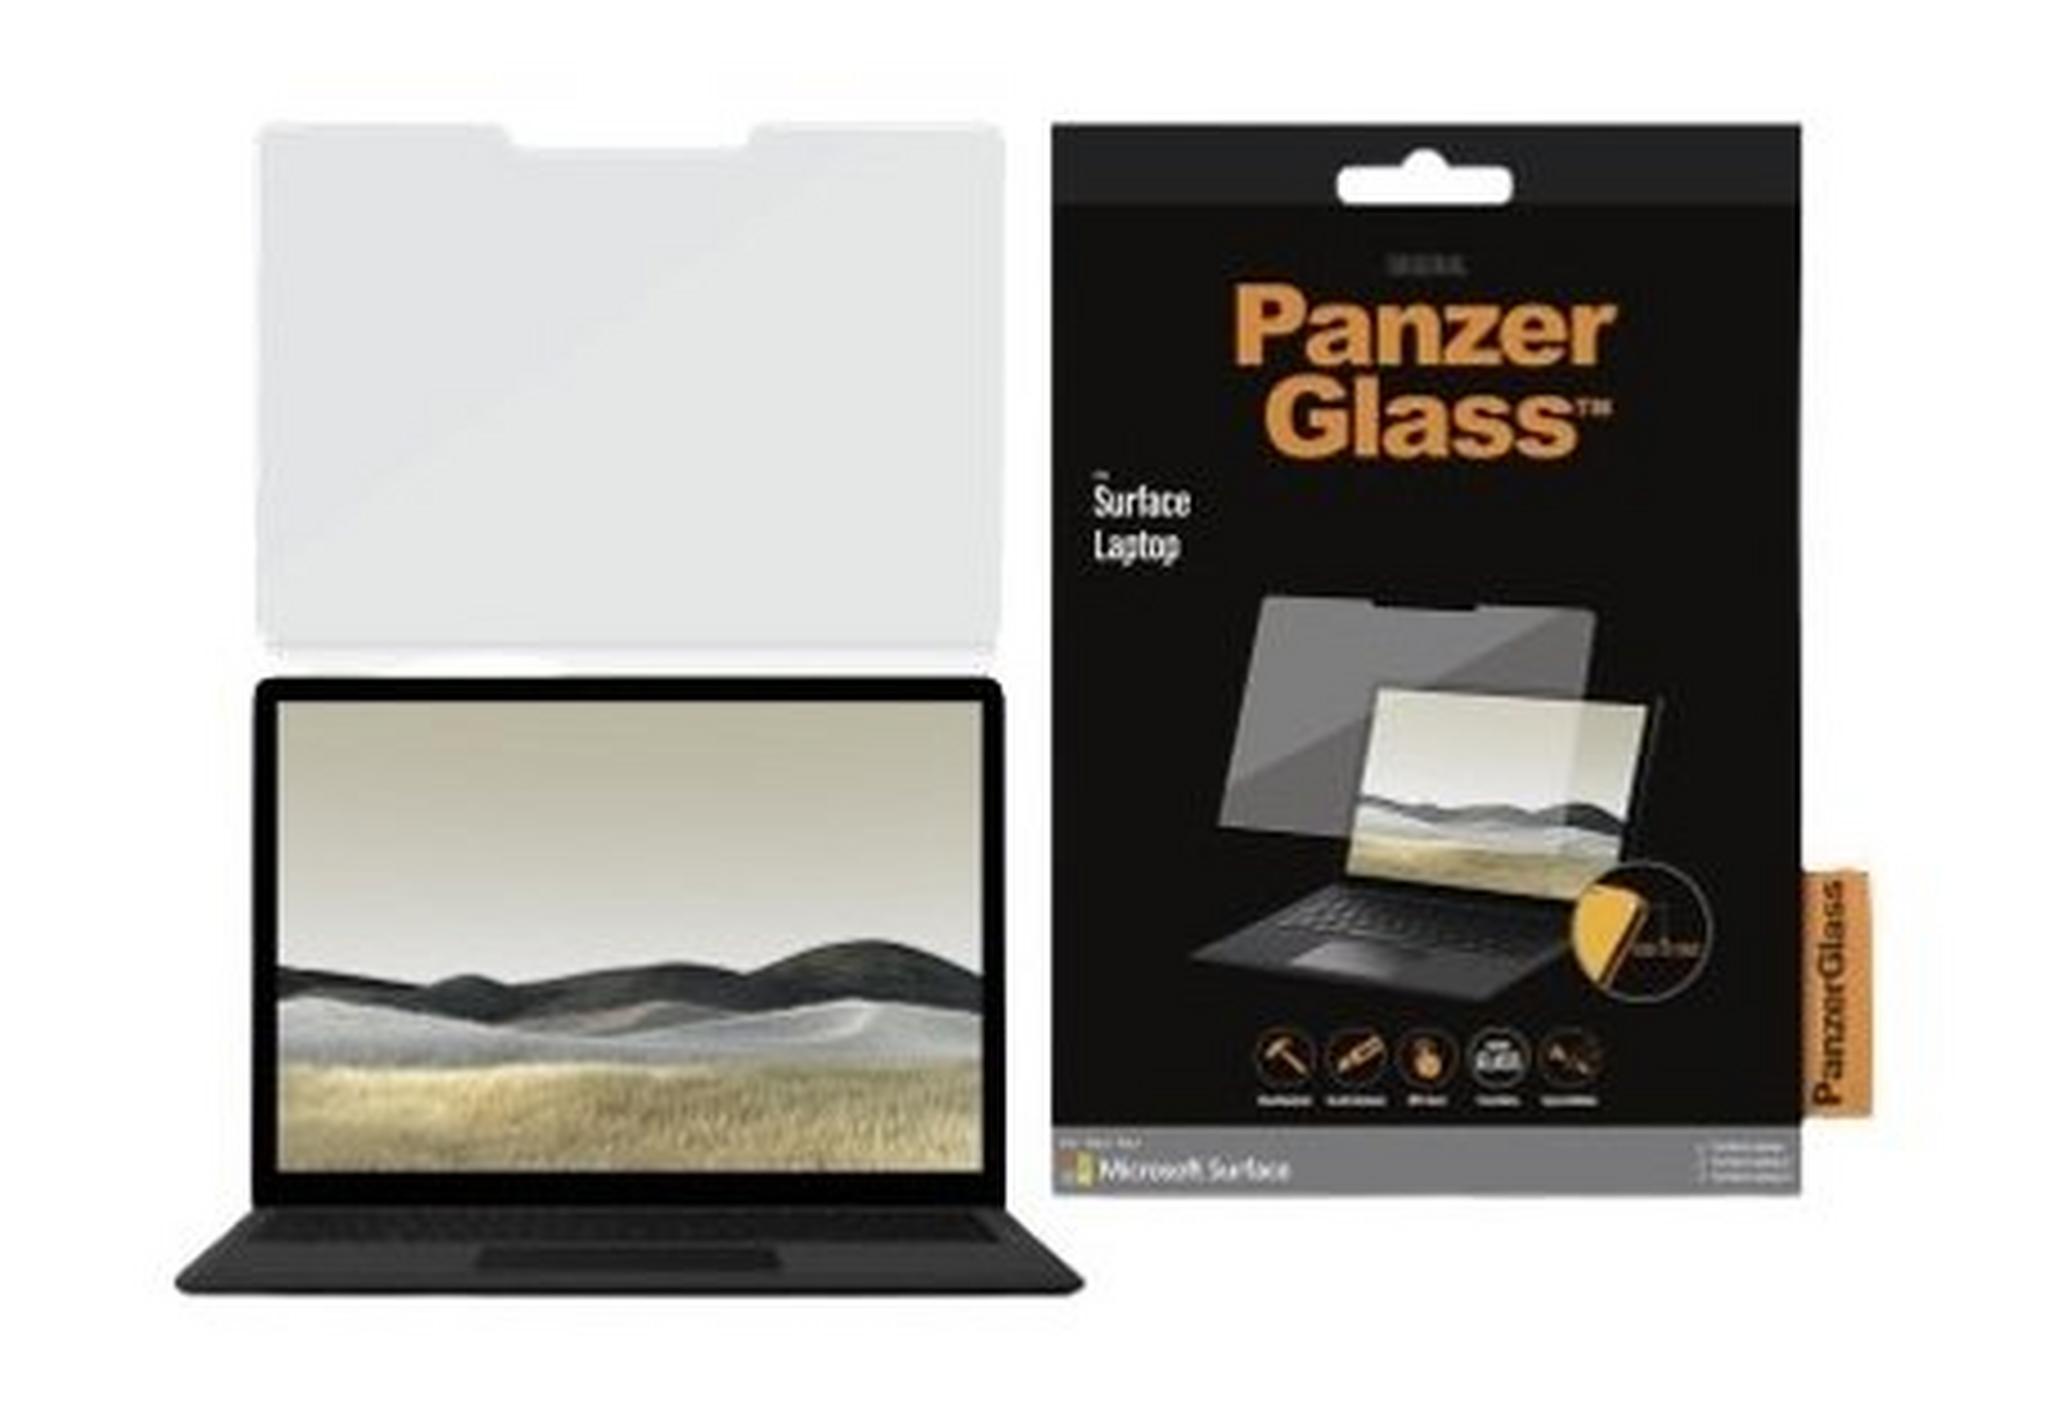 Panzer Microsoft Surface Laptop 13.5-inch Screen Protector - Clear